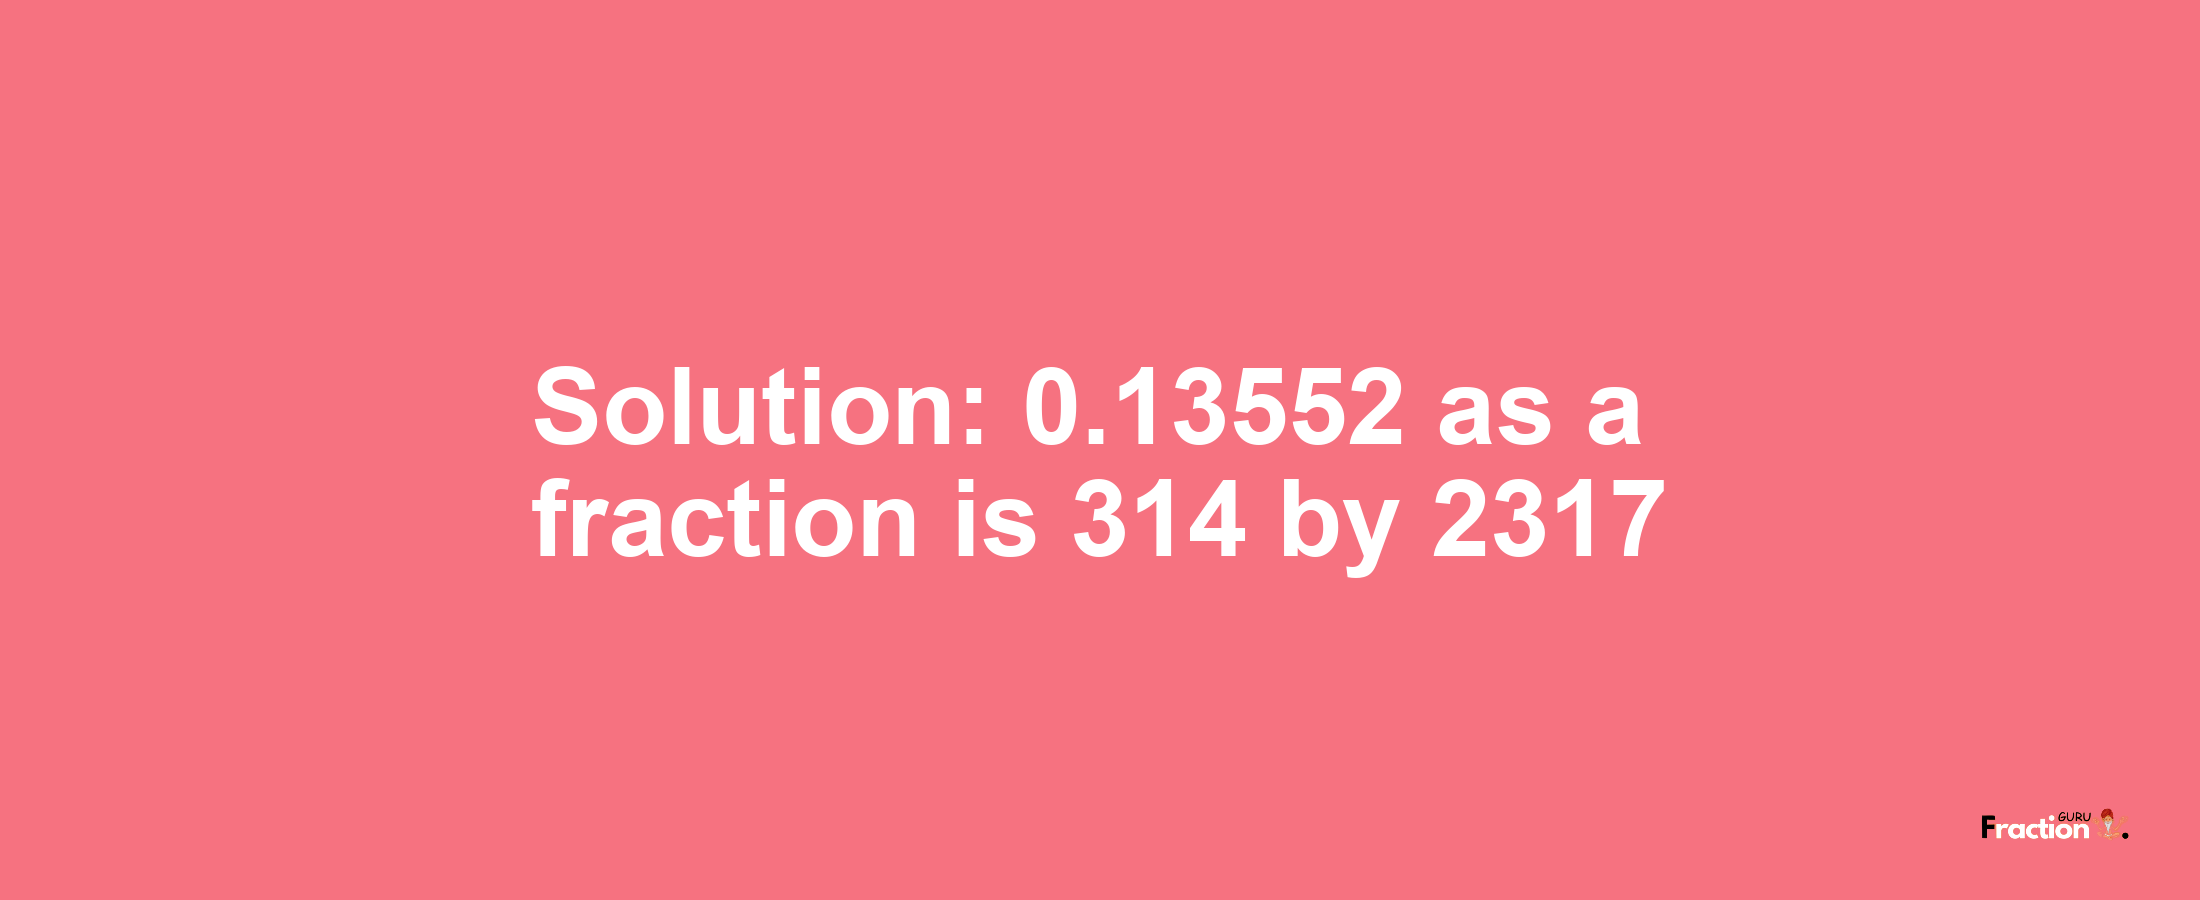 Solution:0.13552 as a fraction is 314/2317